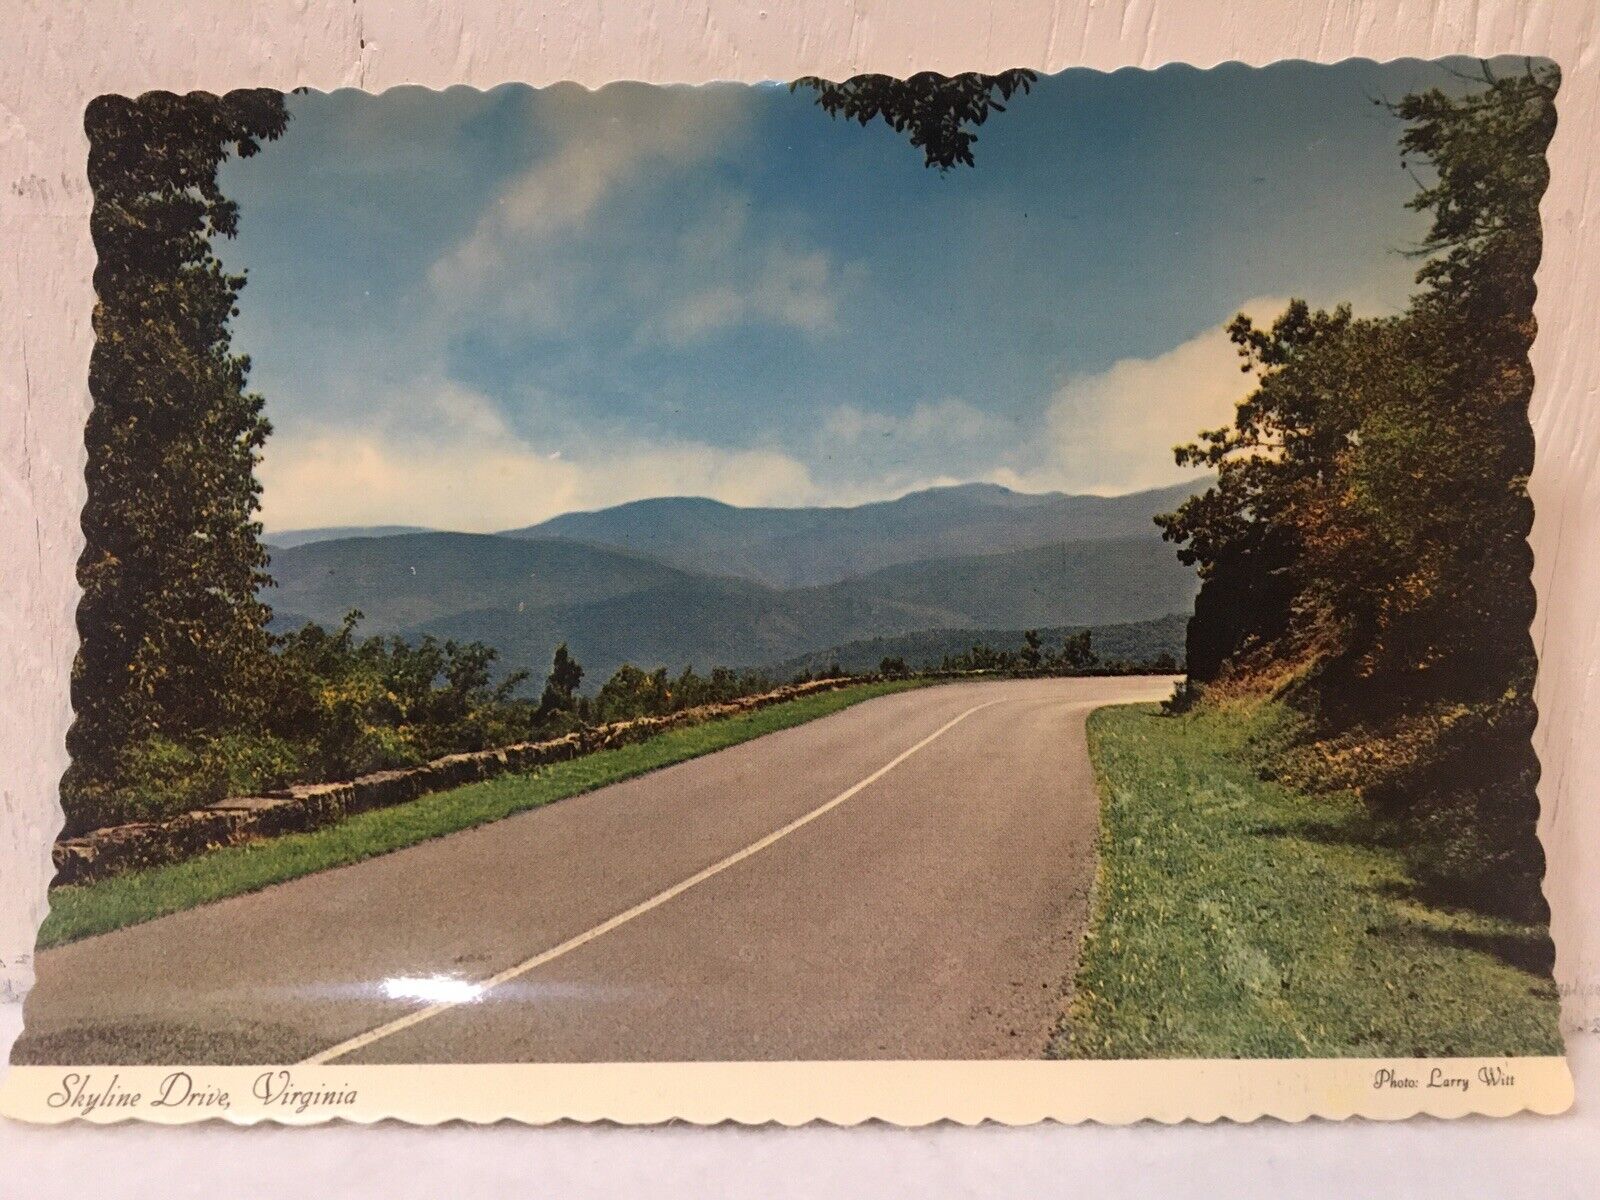 Skyline Drive - Virginia - Mile 22 - Front Royal - Luray Mountains & Road - 1969